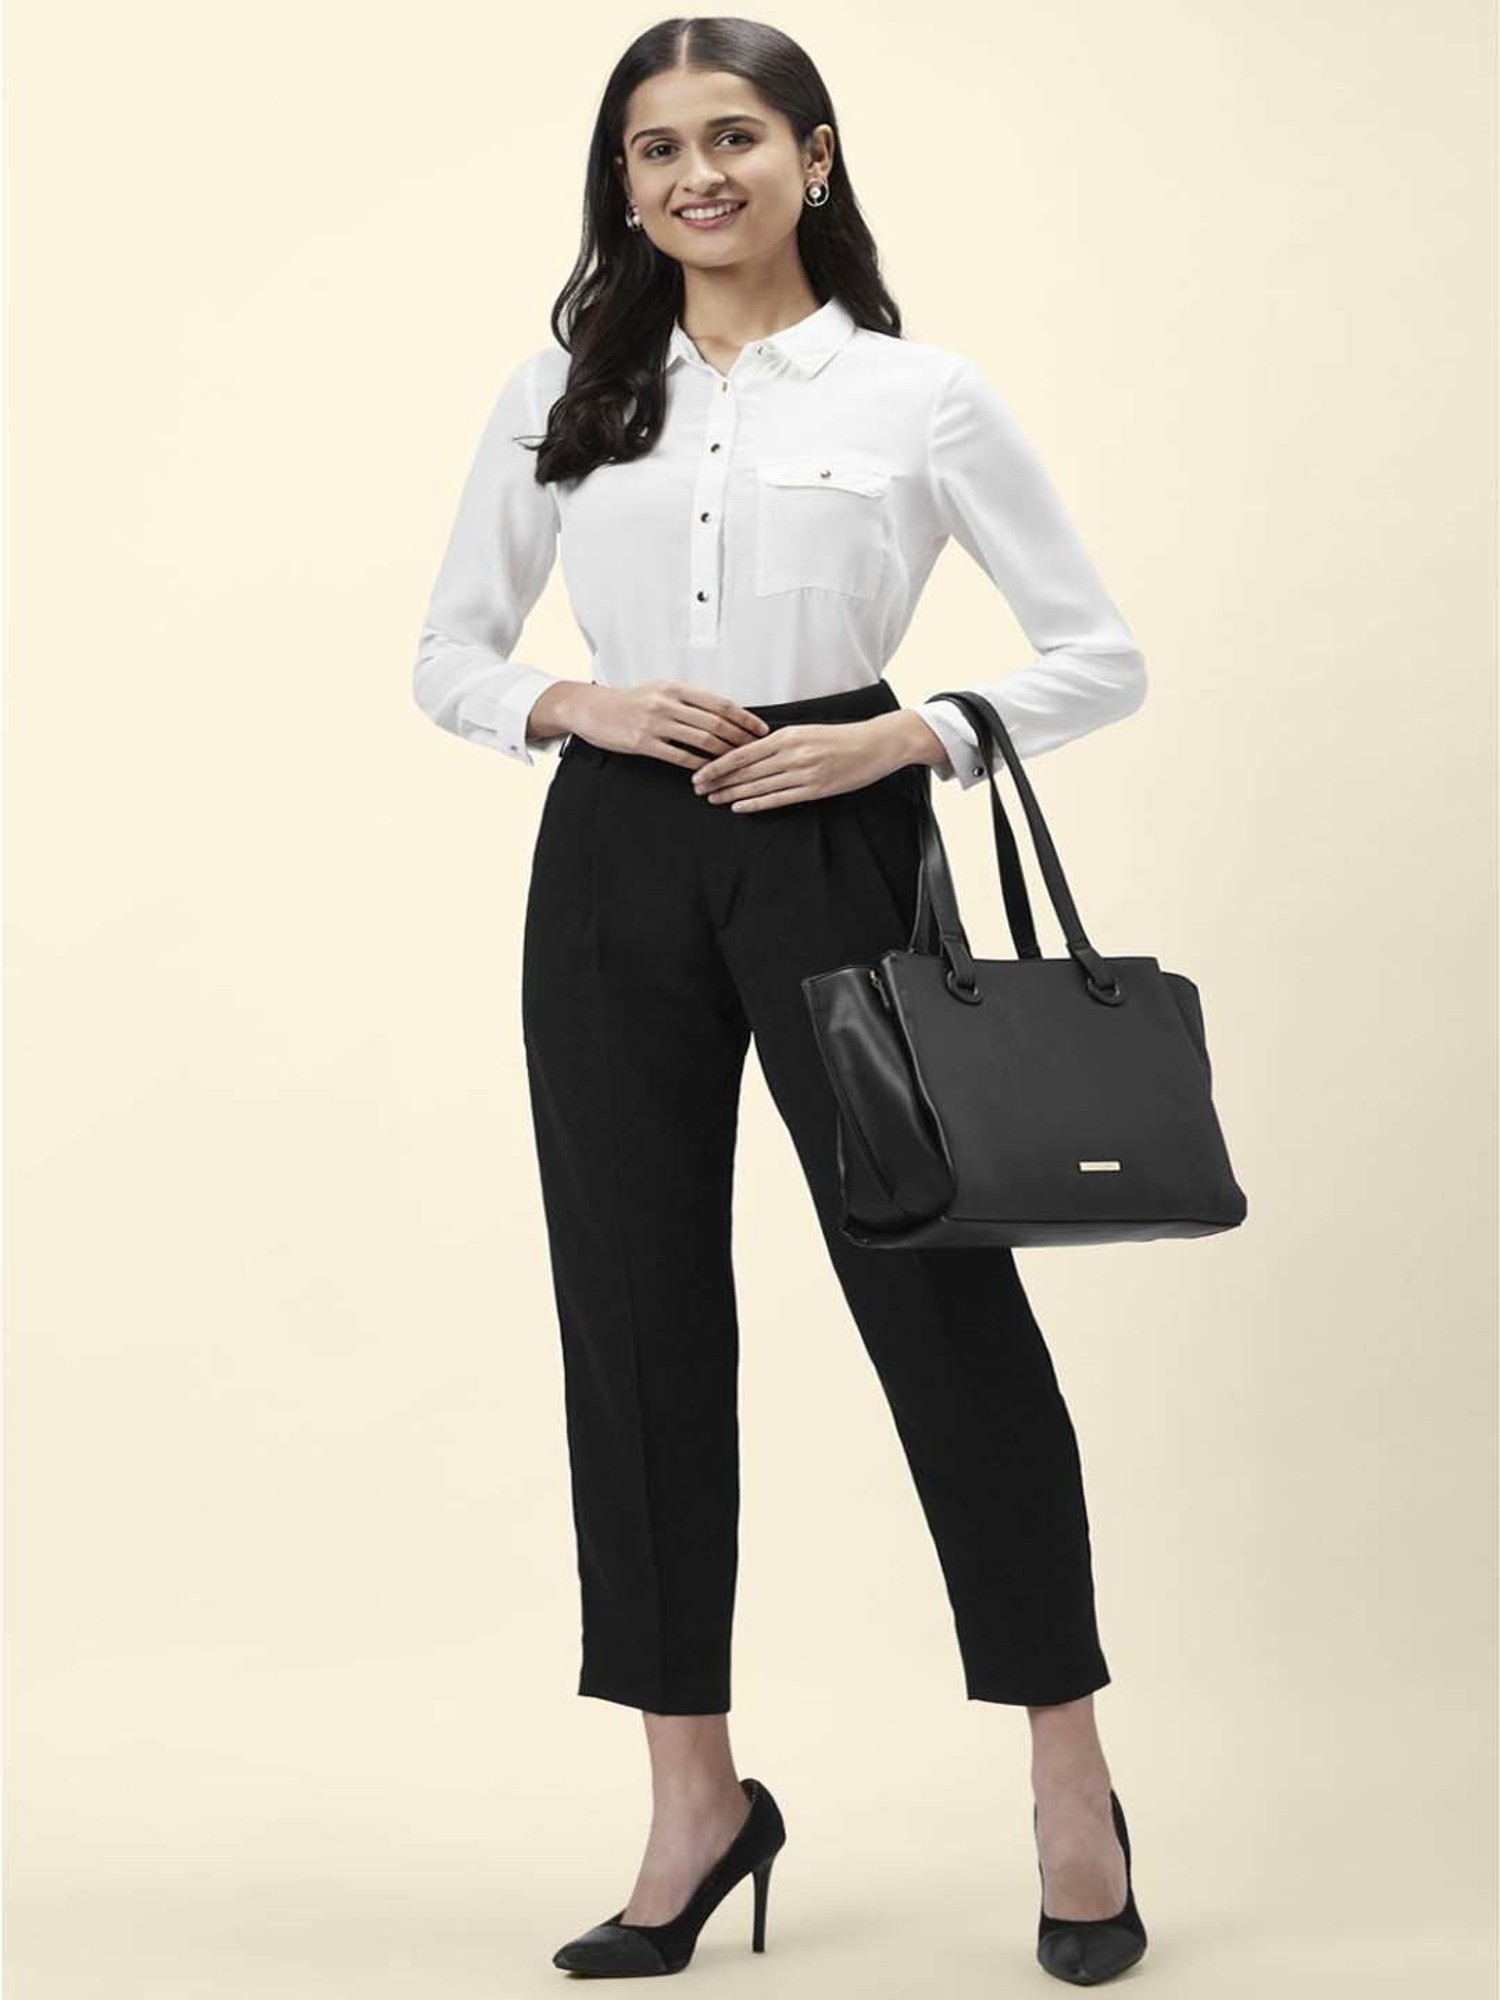 Annabelle By Pantaloons Formal Trousers  Buy Annabelle By Pantaloons  Formal Trousers Online In India